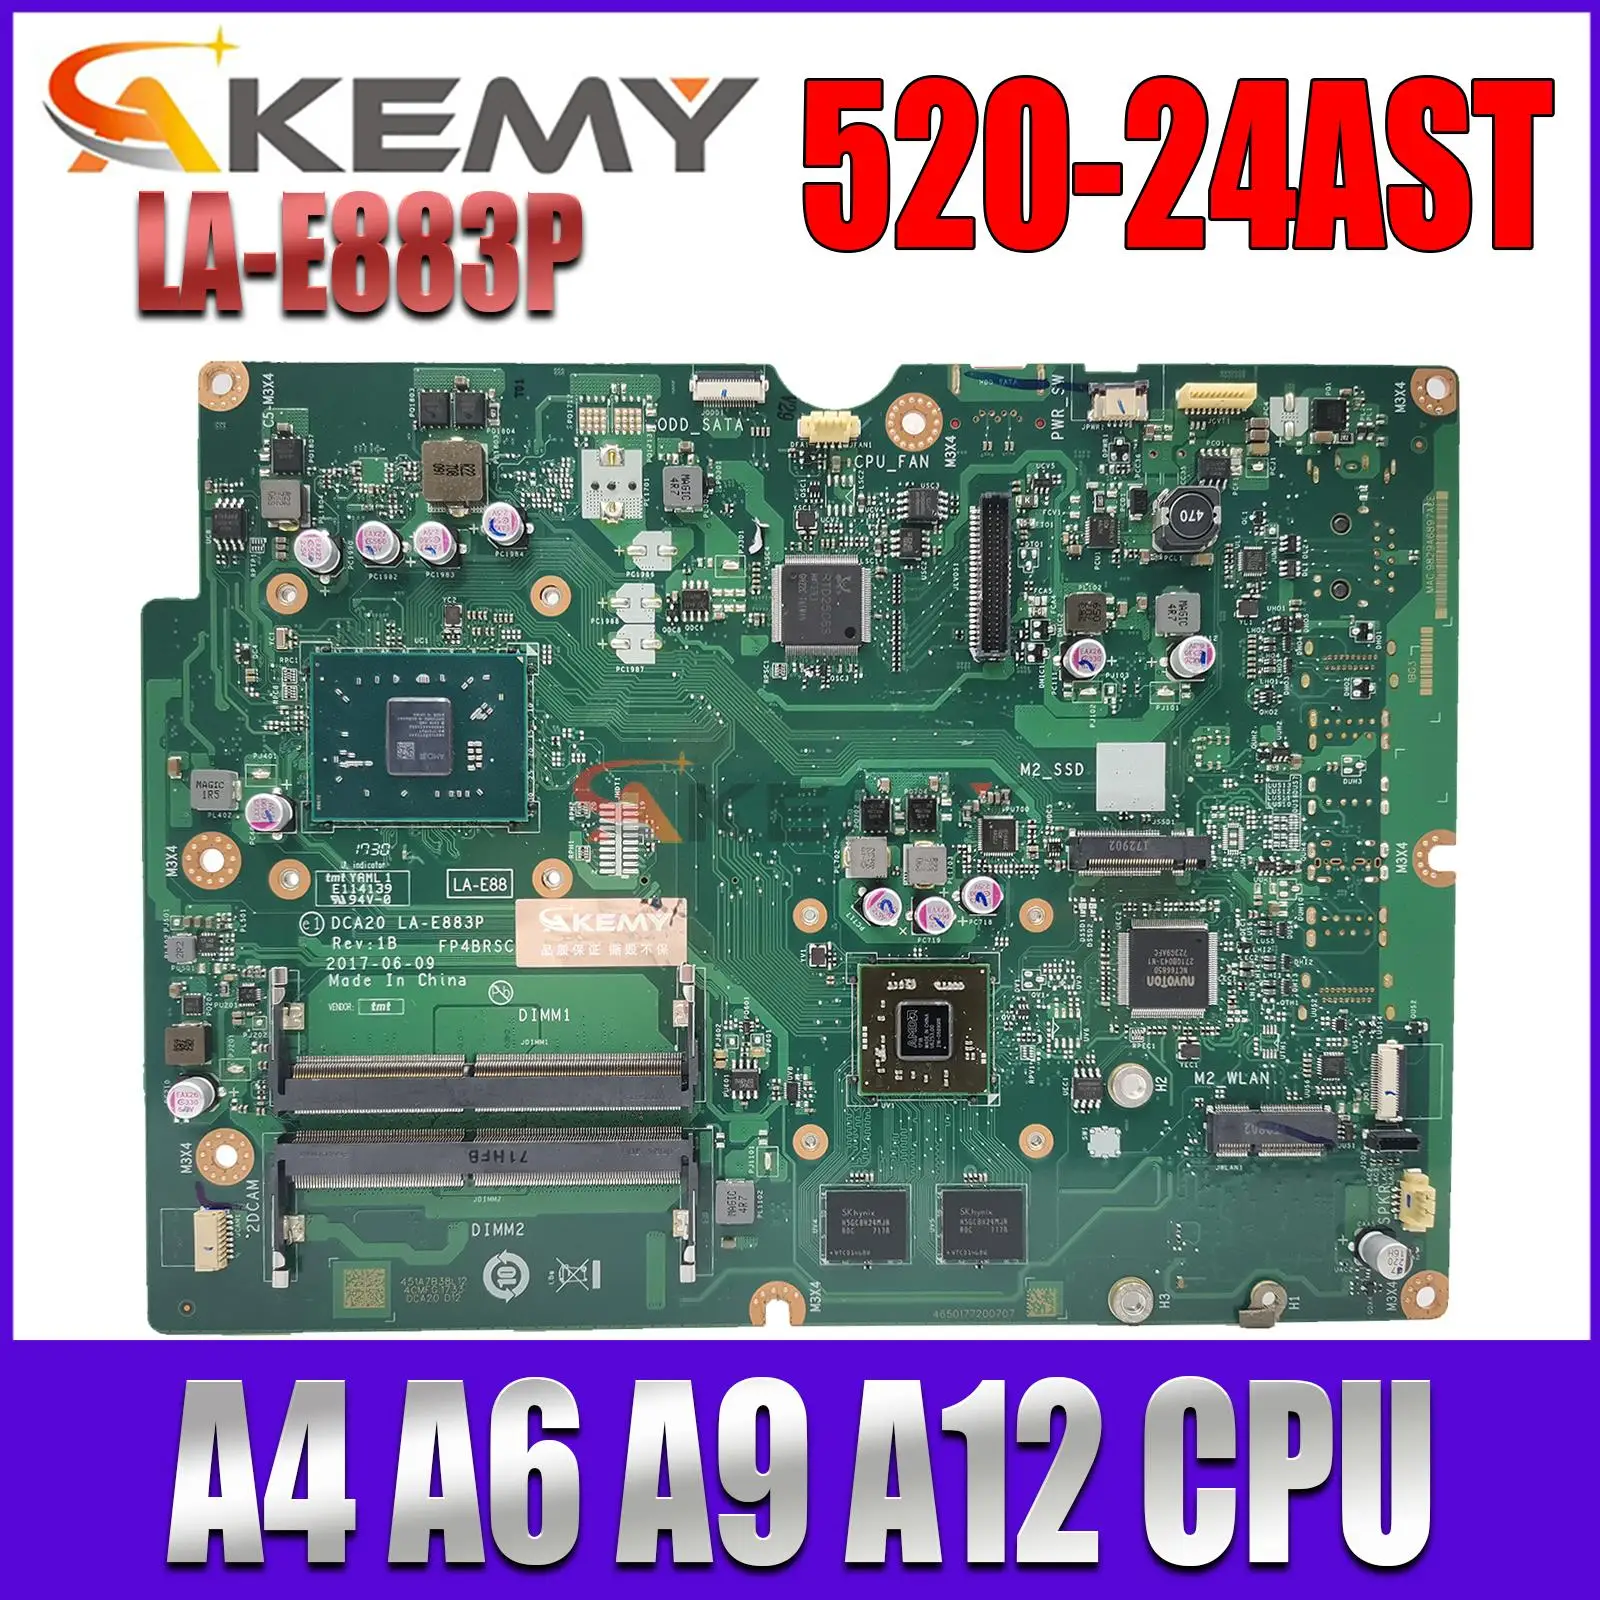 

For Lenovo AIO 520-22AST 520-24AST motherboard Mainboard With AMD CPU A4 A6 A9 A12 UMA LA-E883P motherboard DDR4 100% test work